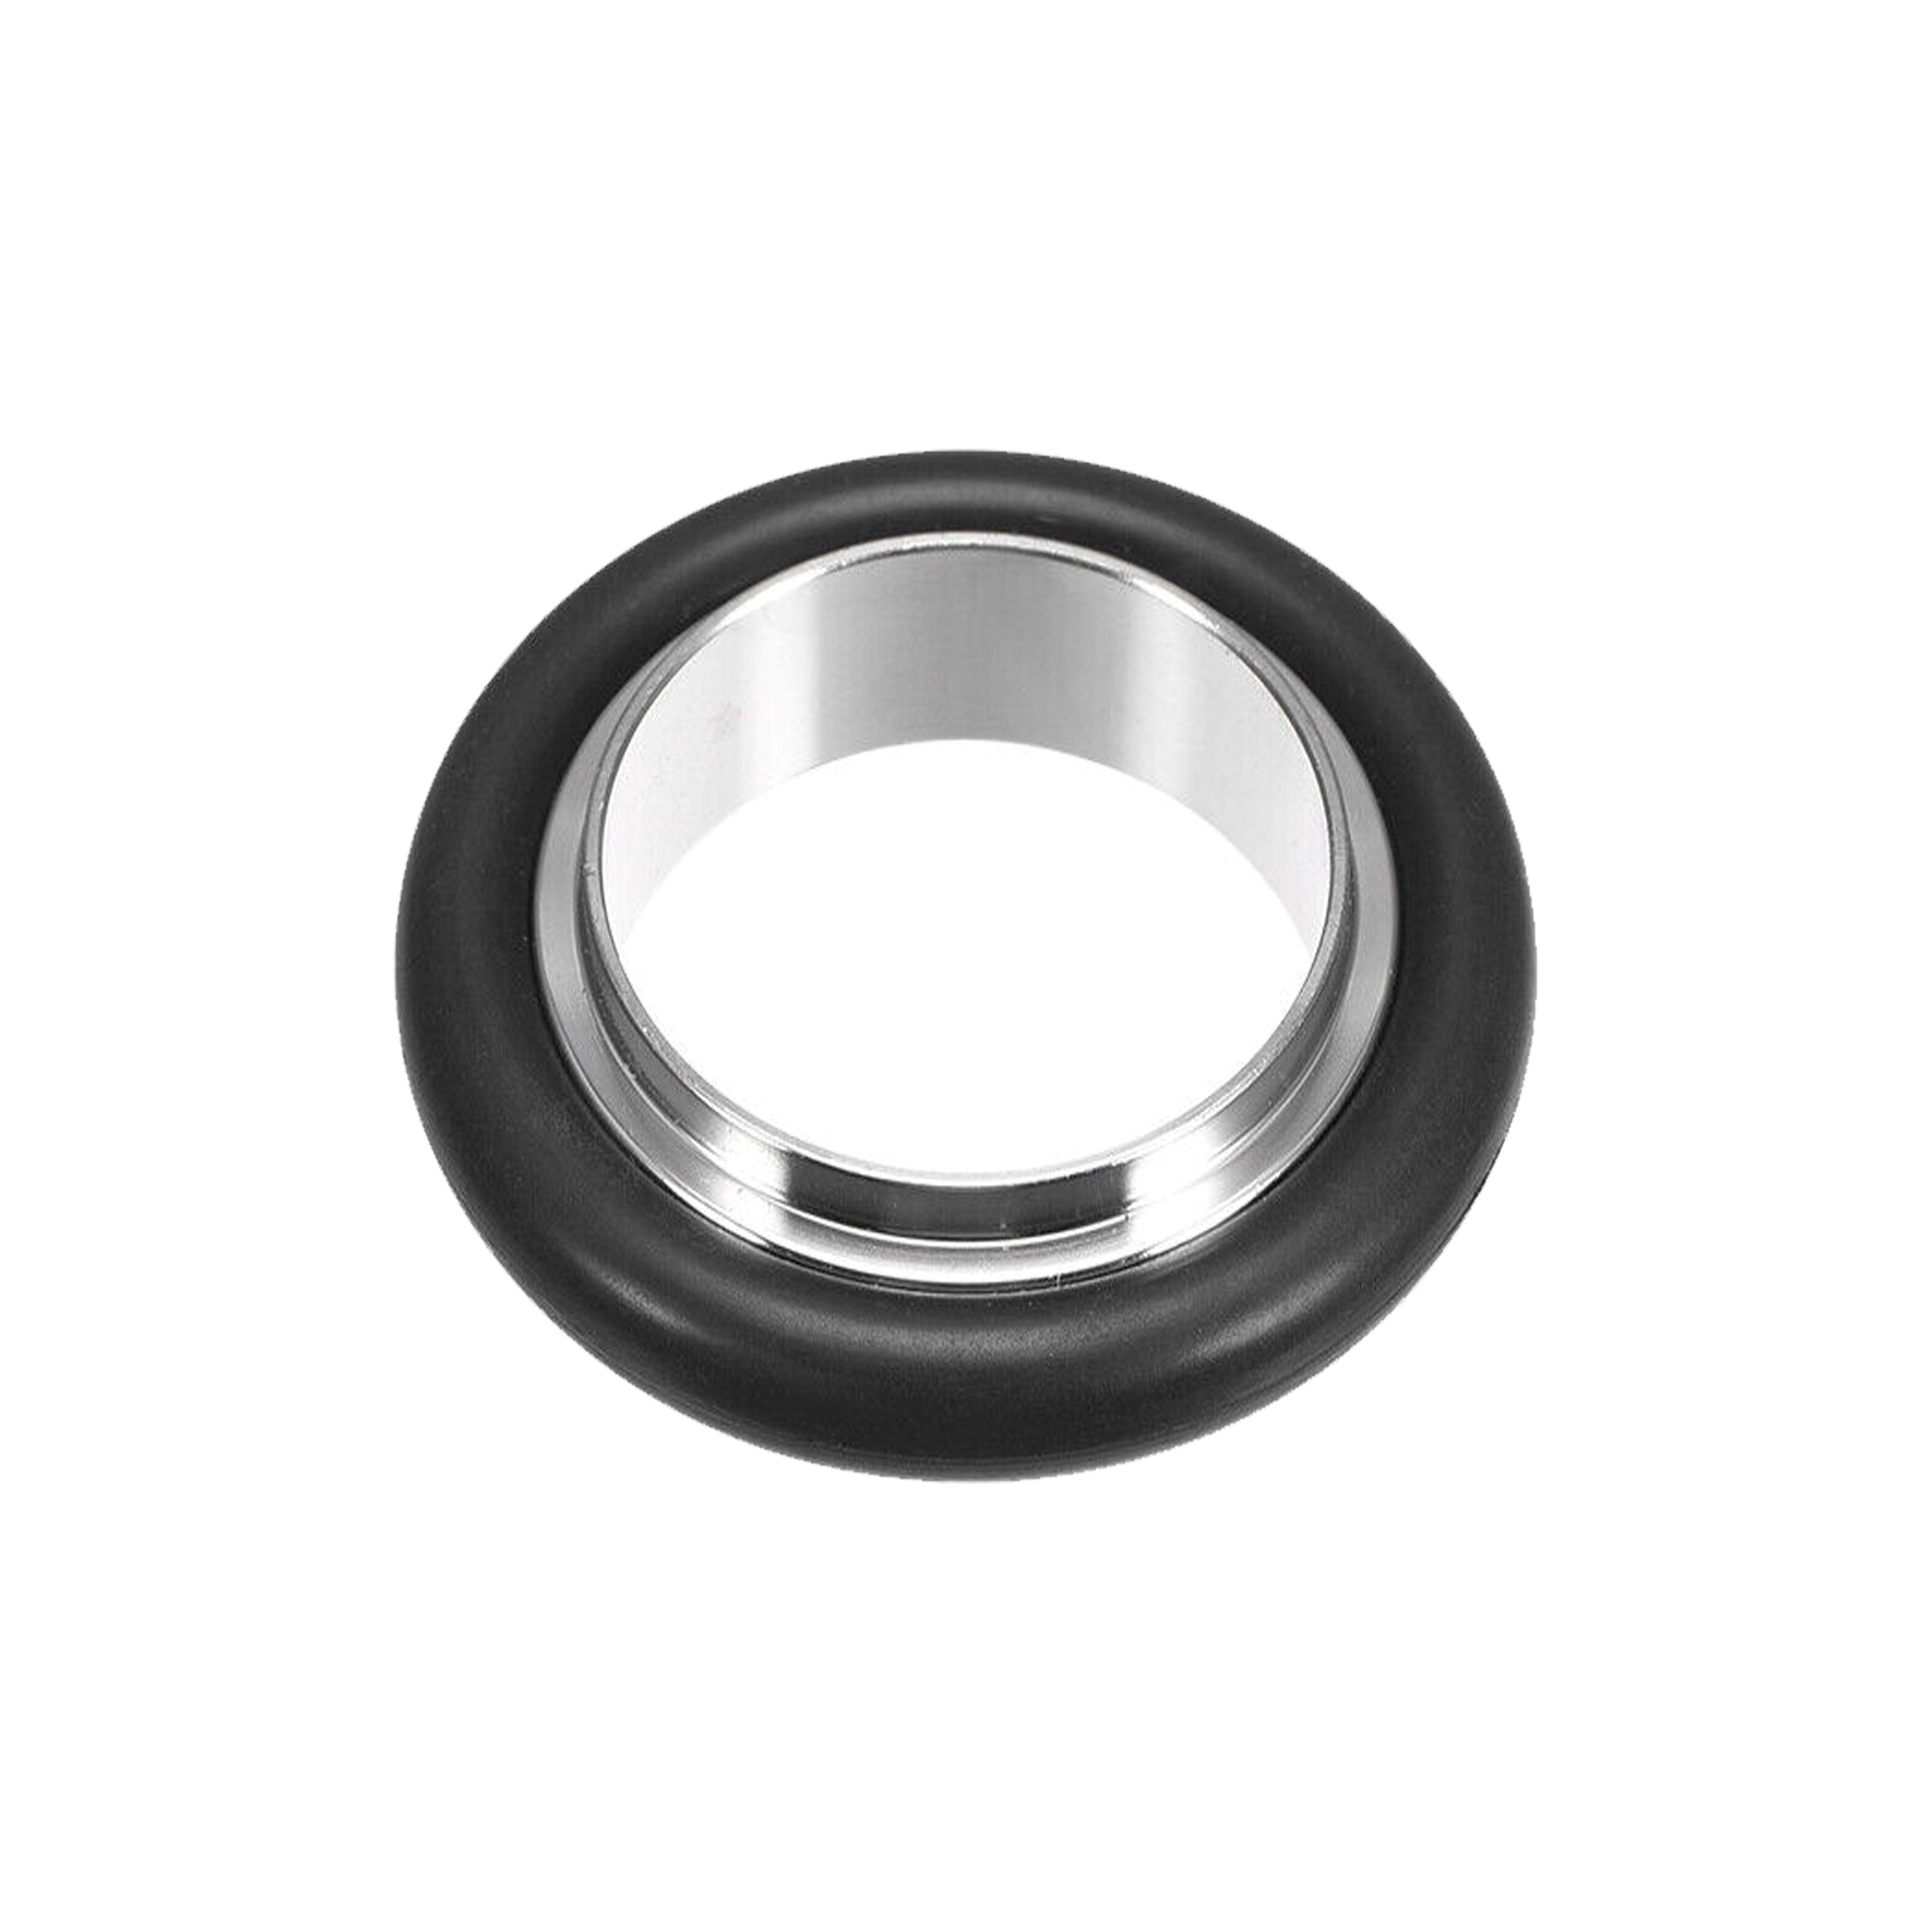 Replacement Centering Ring & O-ring for VacMaxx Kit